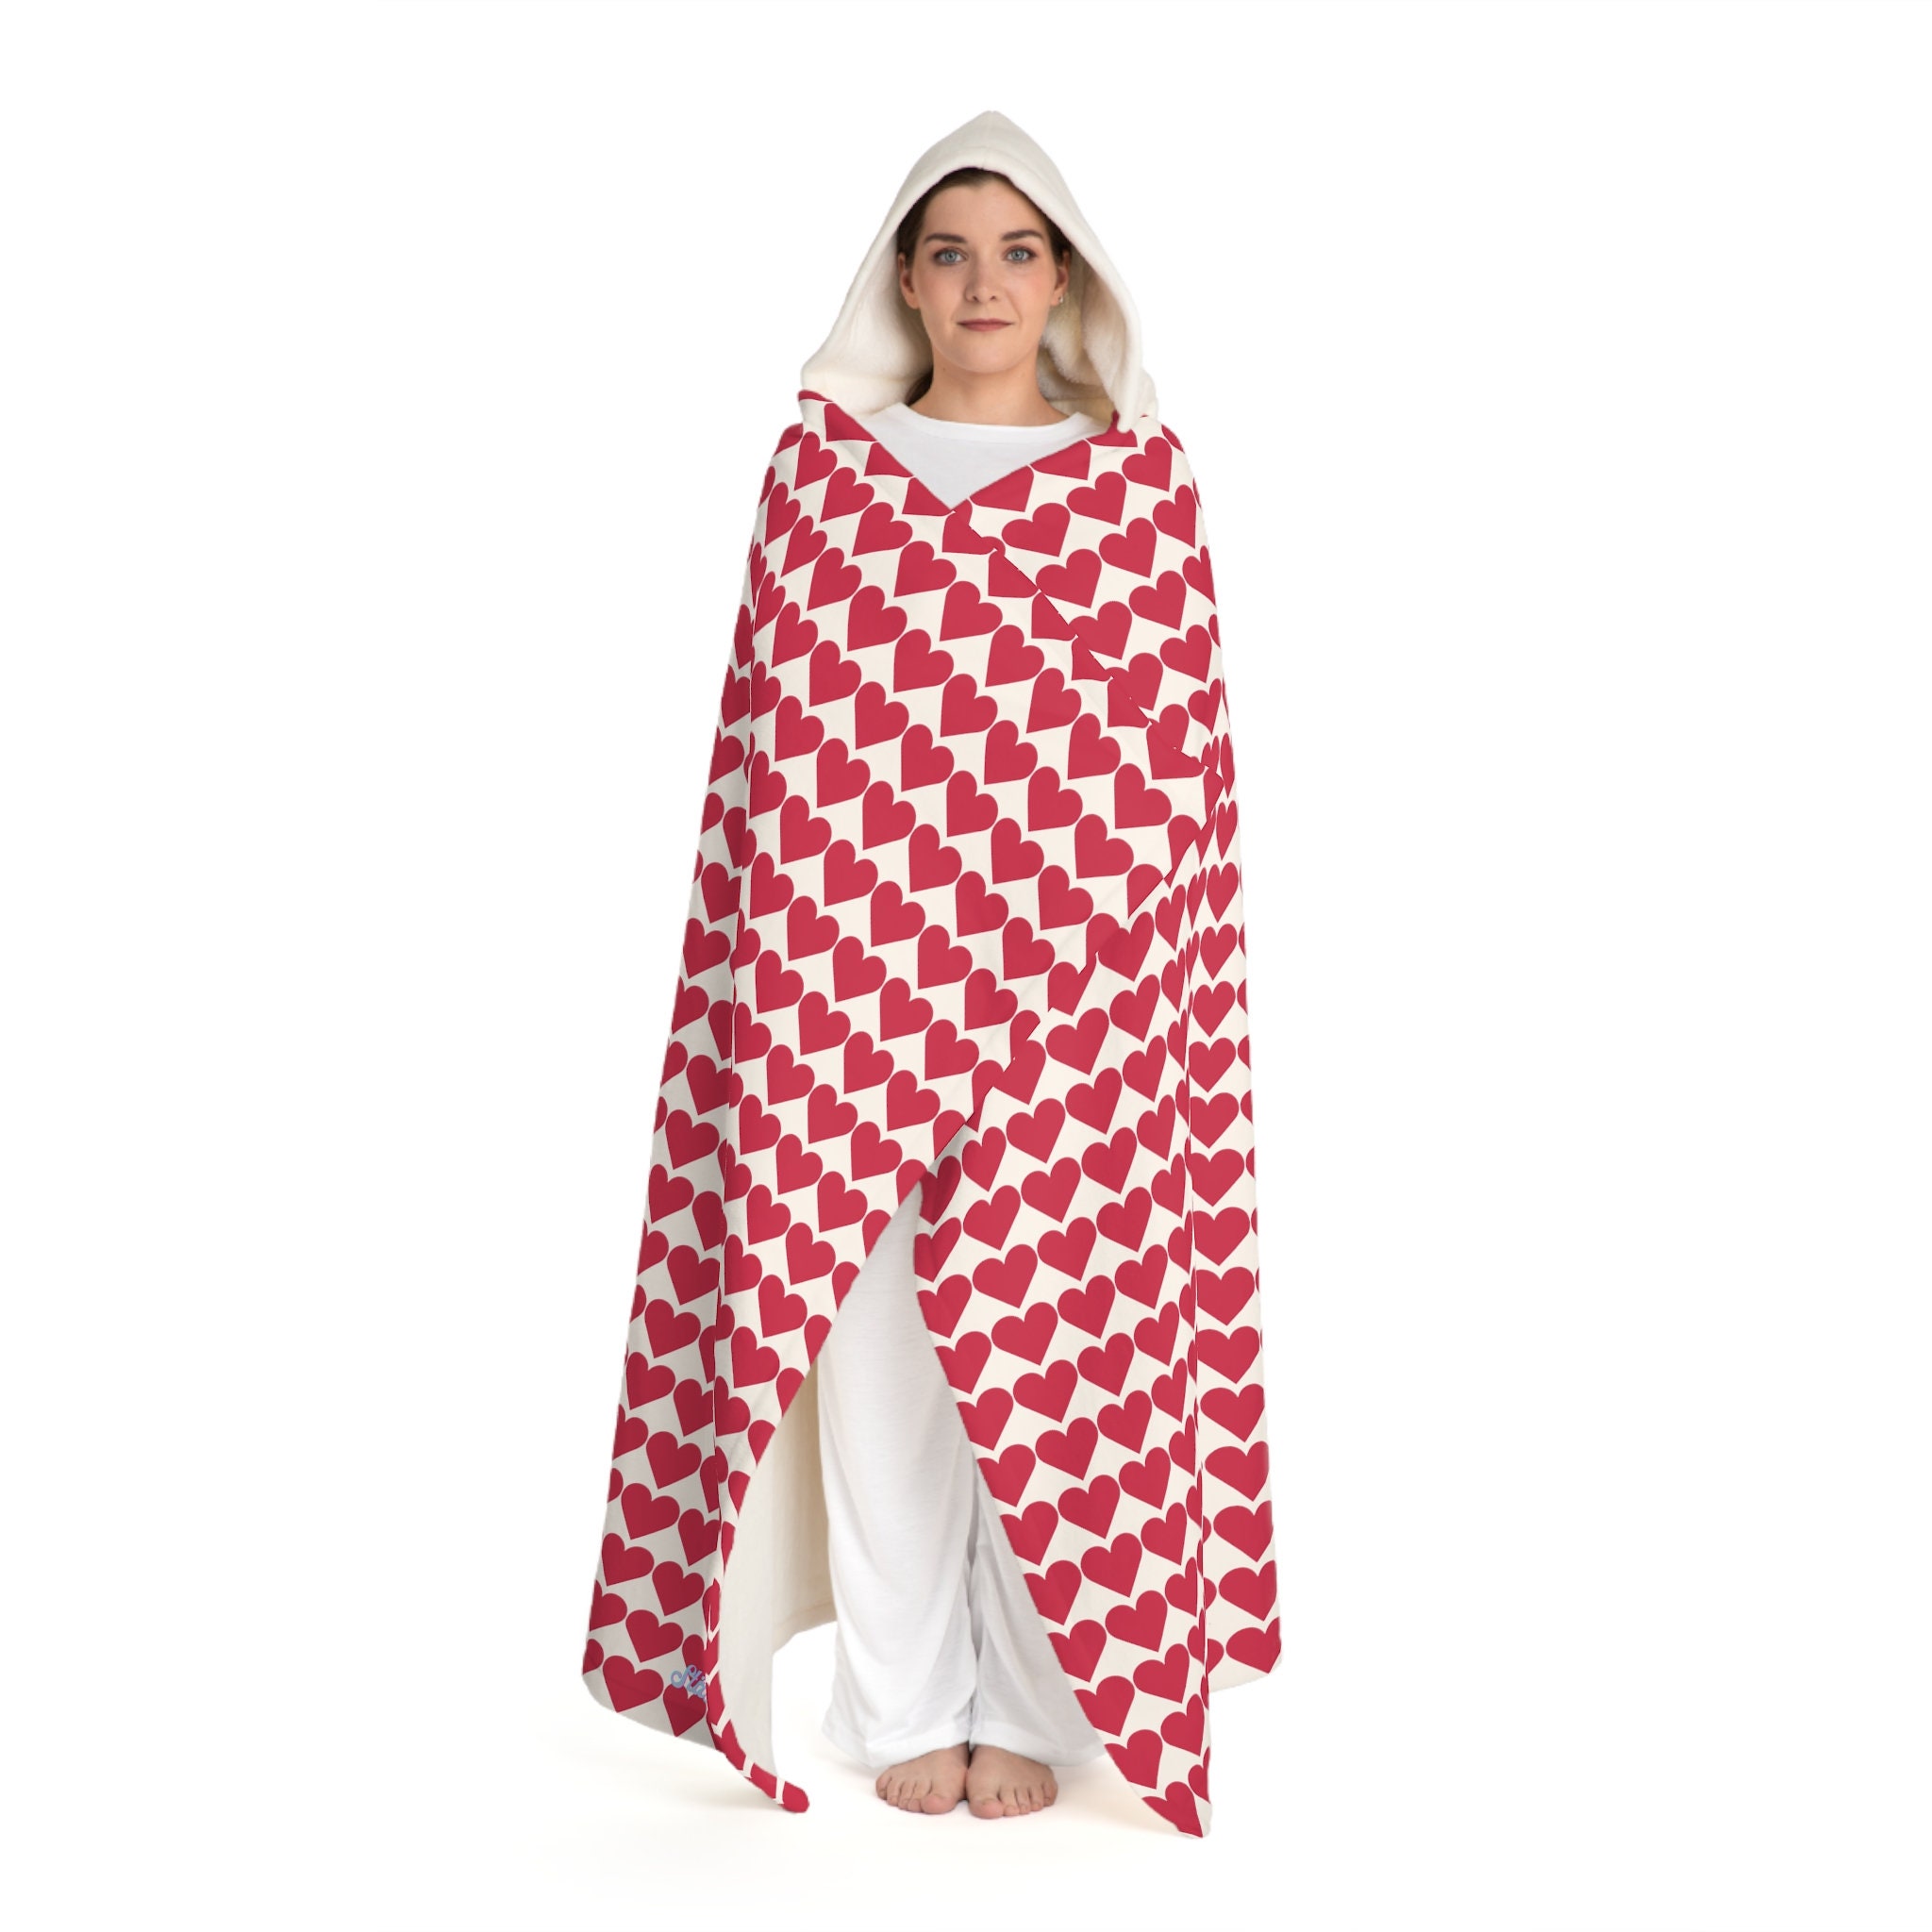 Discover red heart hooded blanket, highland calf outerwear winter puffer windbreaker, beach warm blanket, couple valentine's day camping blanket